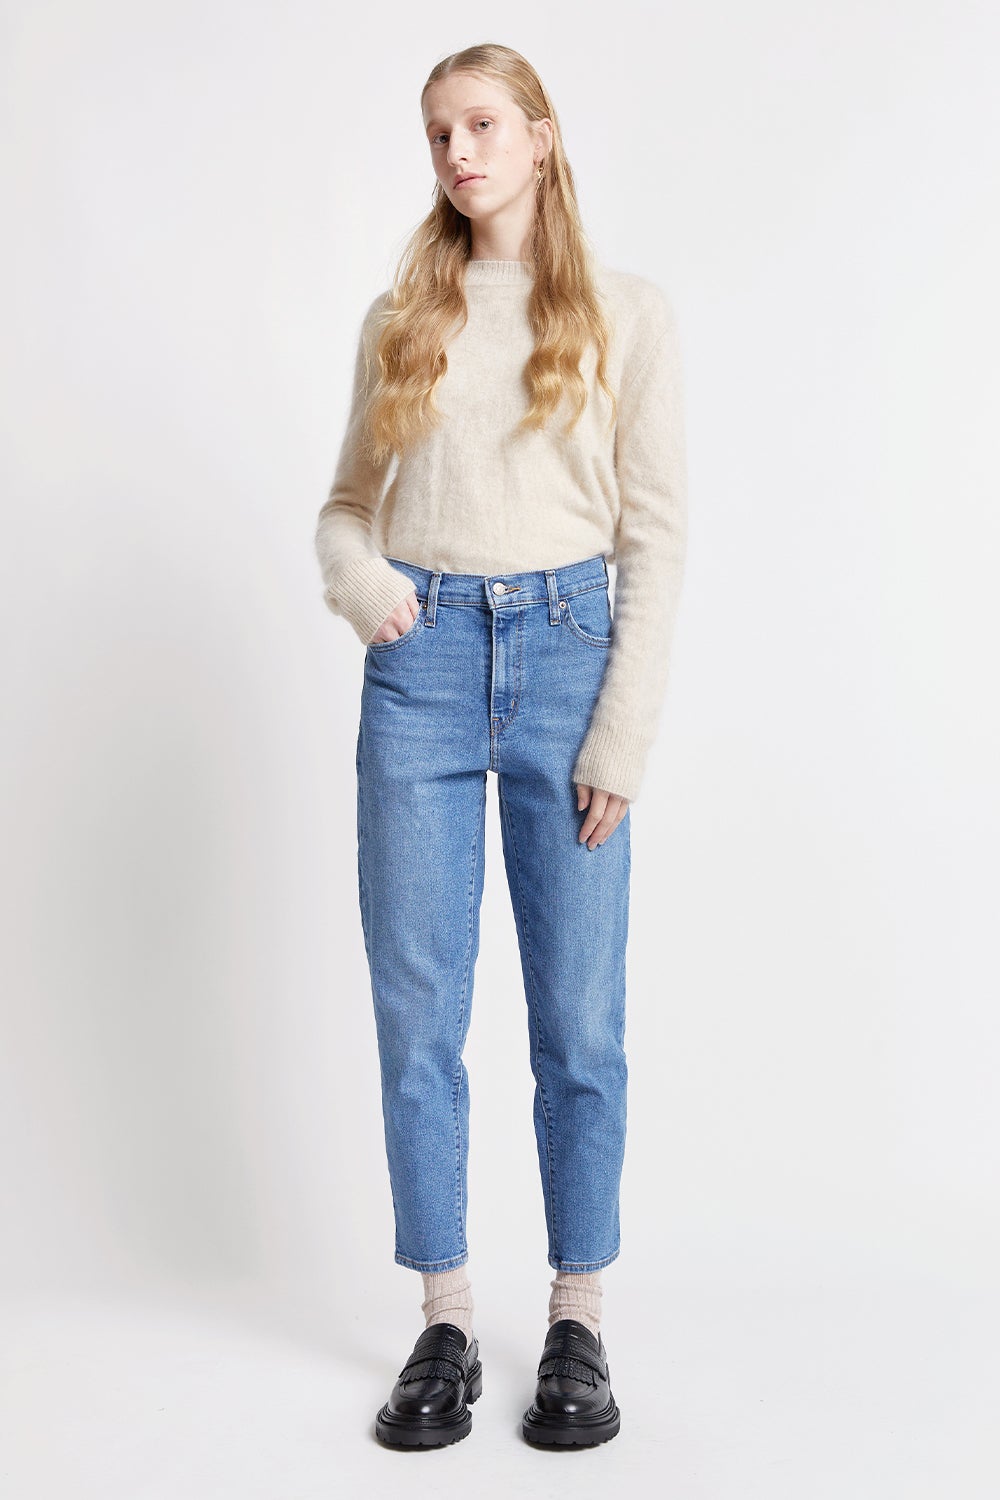 Levi's High Waisted Mom Jeans Fit The Bill